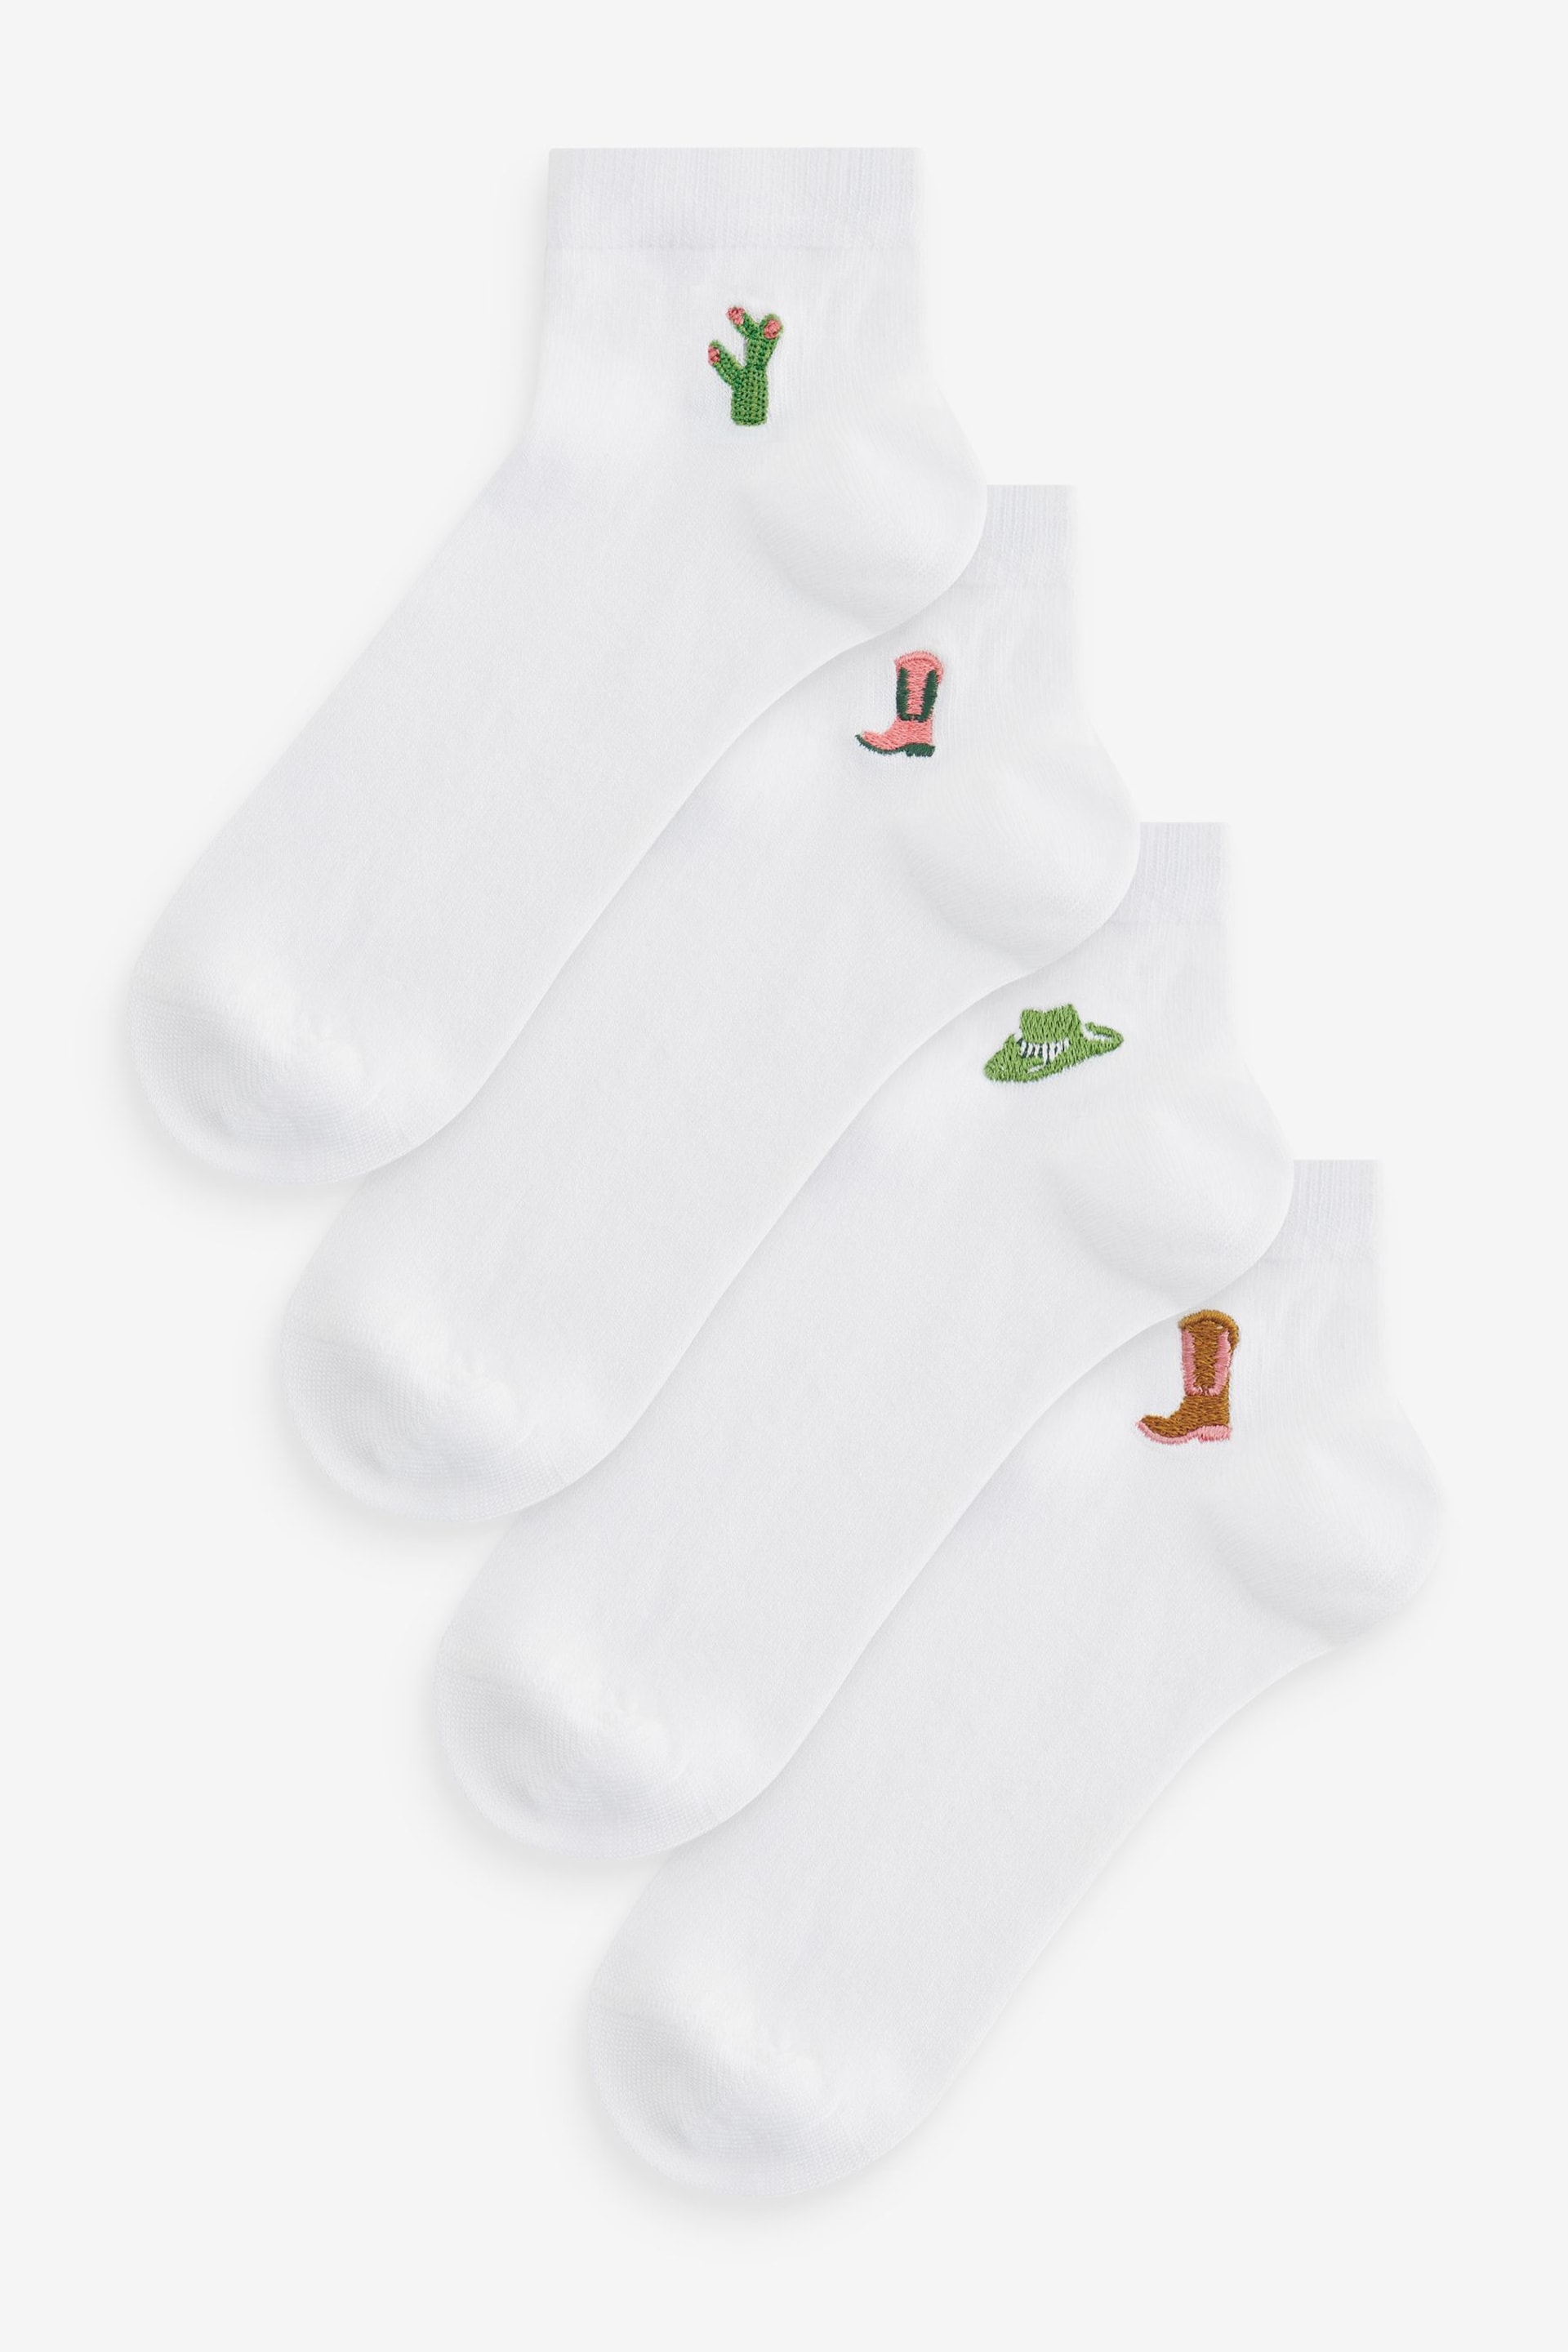 Cowgirl Embroidered Motif White Trainers Socks 4 Pack - Image 1 of 6